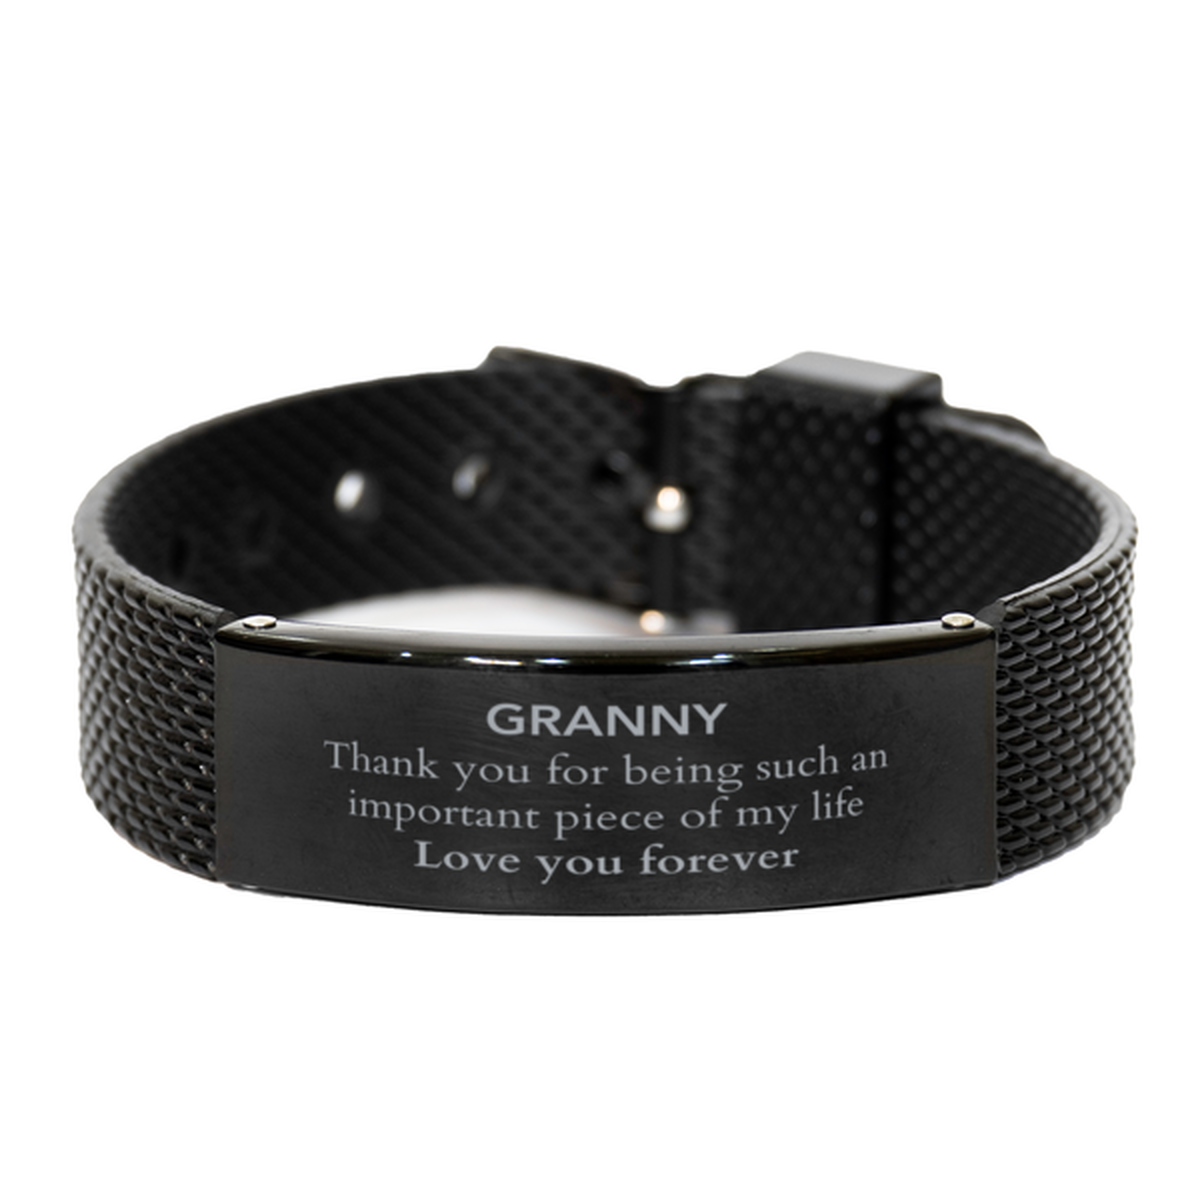 Appropriate Granny Black Shark Mesh Bracelet Epic Birthday Gifts for Granny Thank you for being such an important piece of my life Granny Christmas Mothers Fathers Day